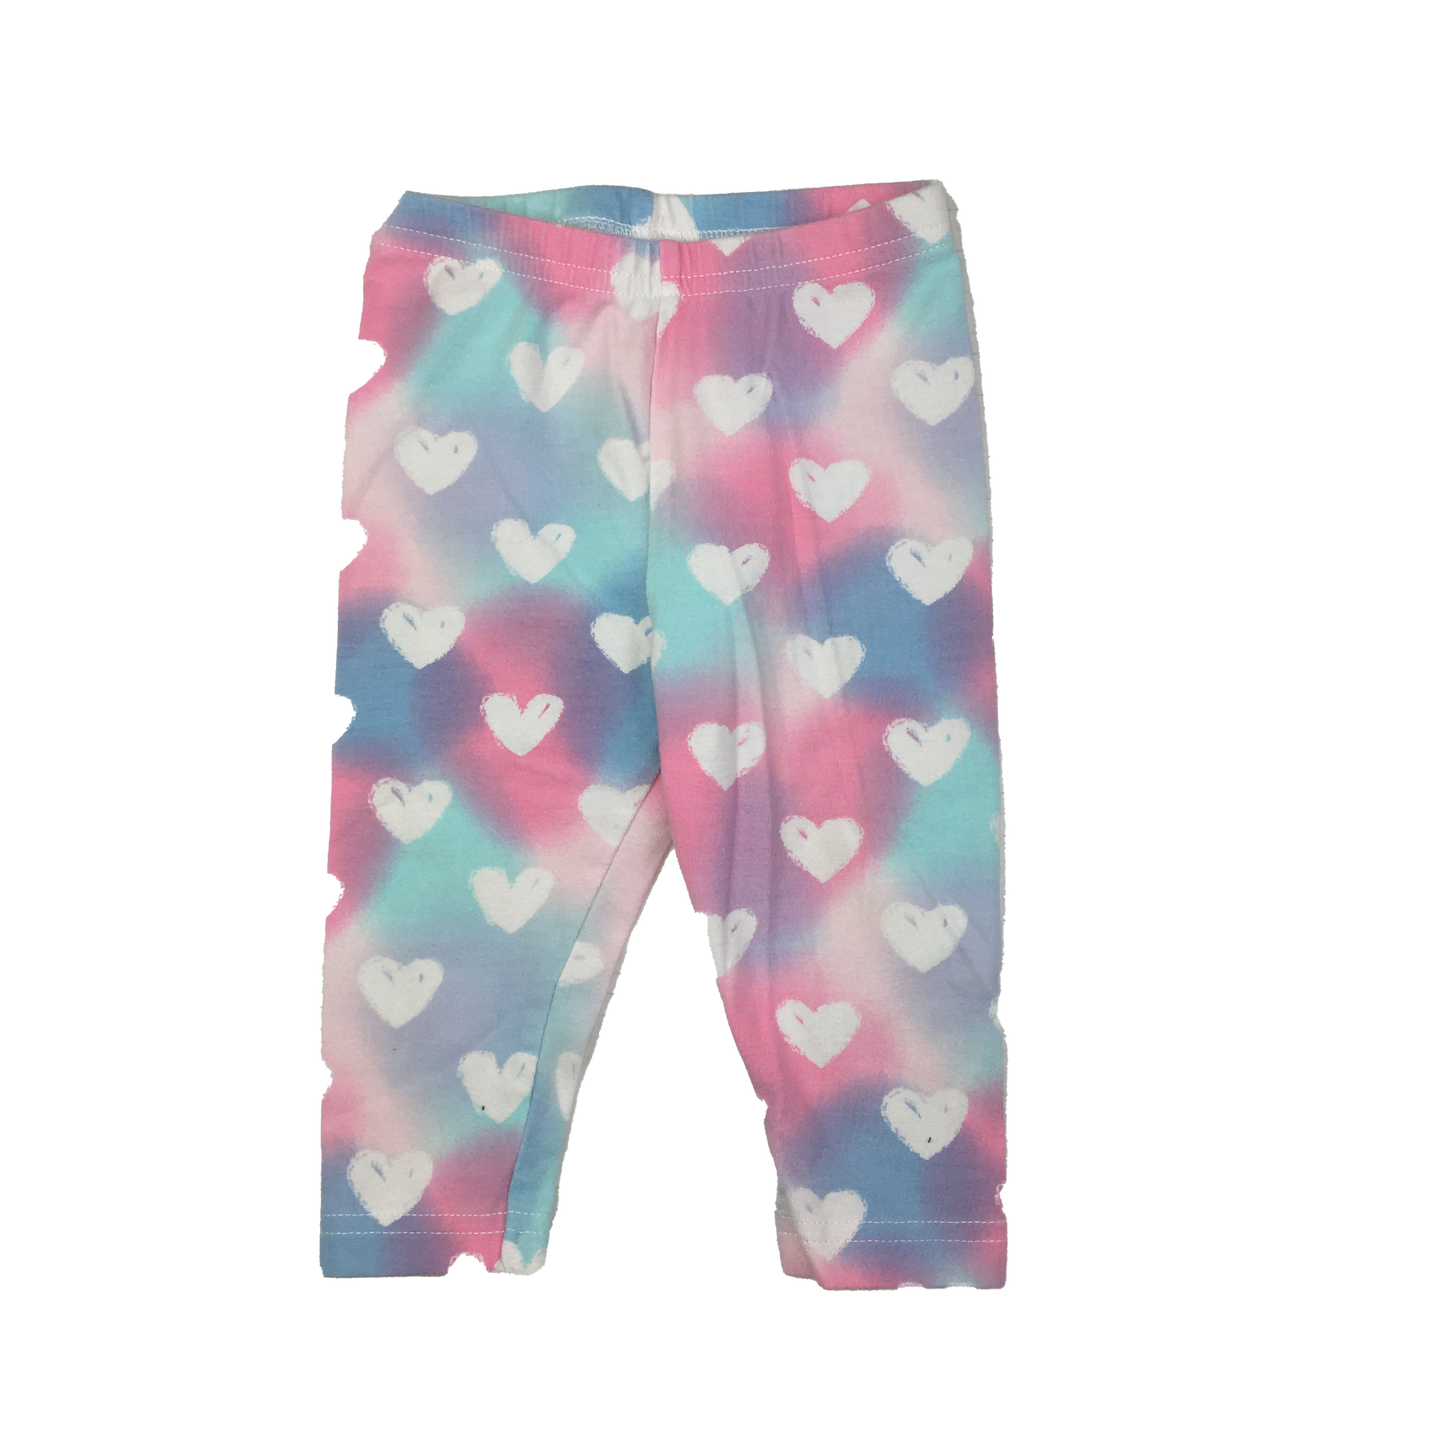 Carter's Pink & Blue Leggings with Hearts 9M